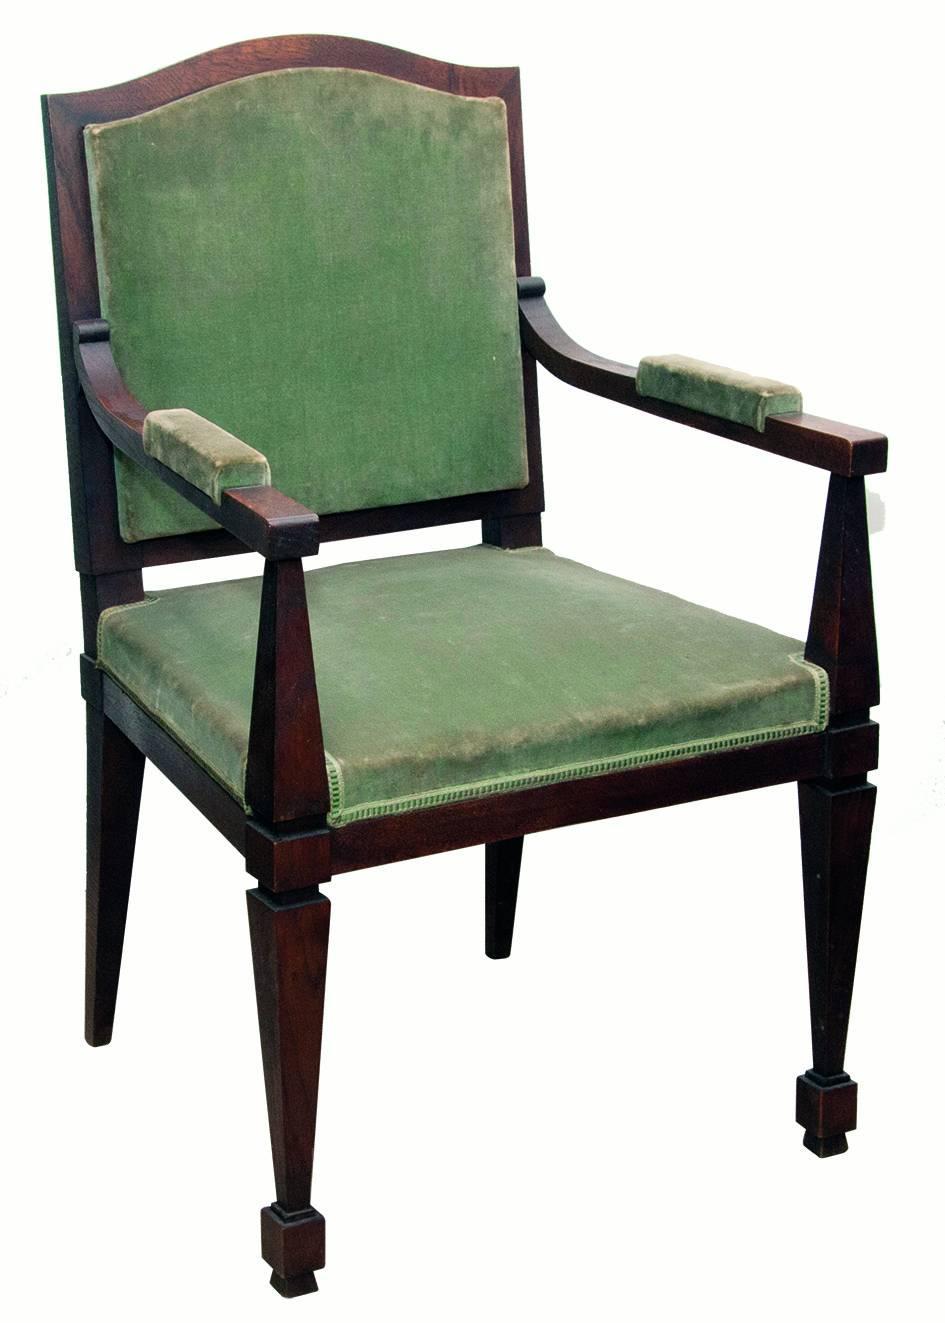 A pair of neoclassical André Arbus (1903-1969) armchairs in dark cerused oak.
In their original condition.
Provenance: Flat decorated by André Arbus.

Fully documented. 

Two pairs available.
Crate and Fedex priority shipping.